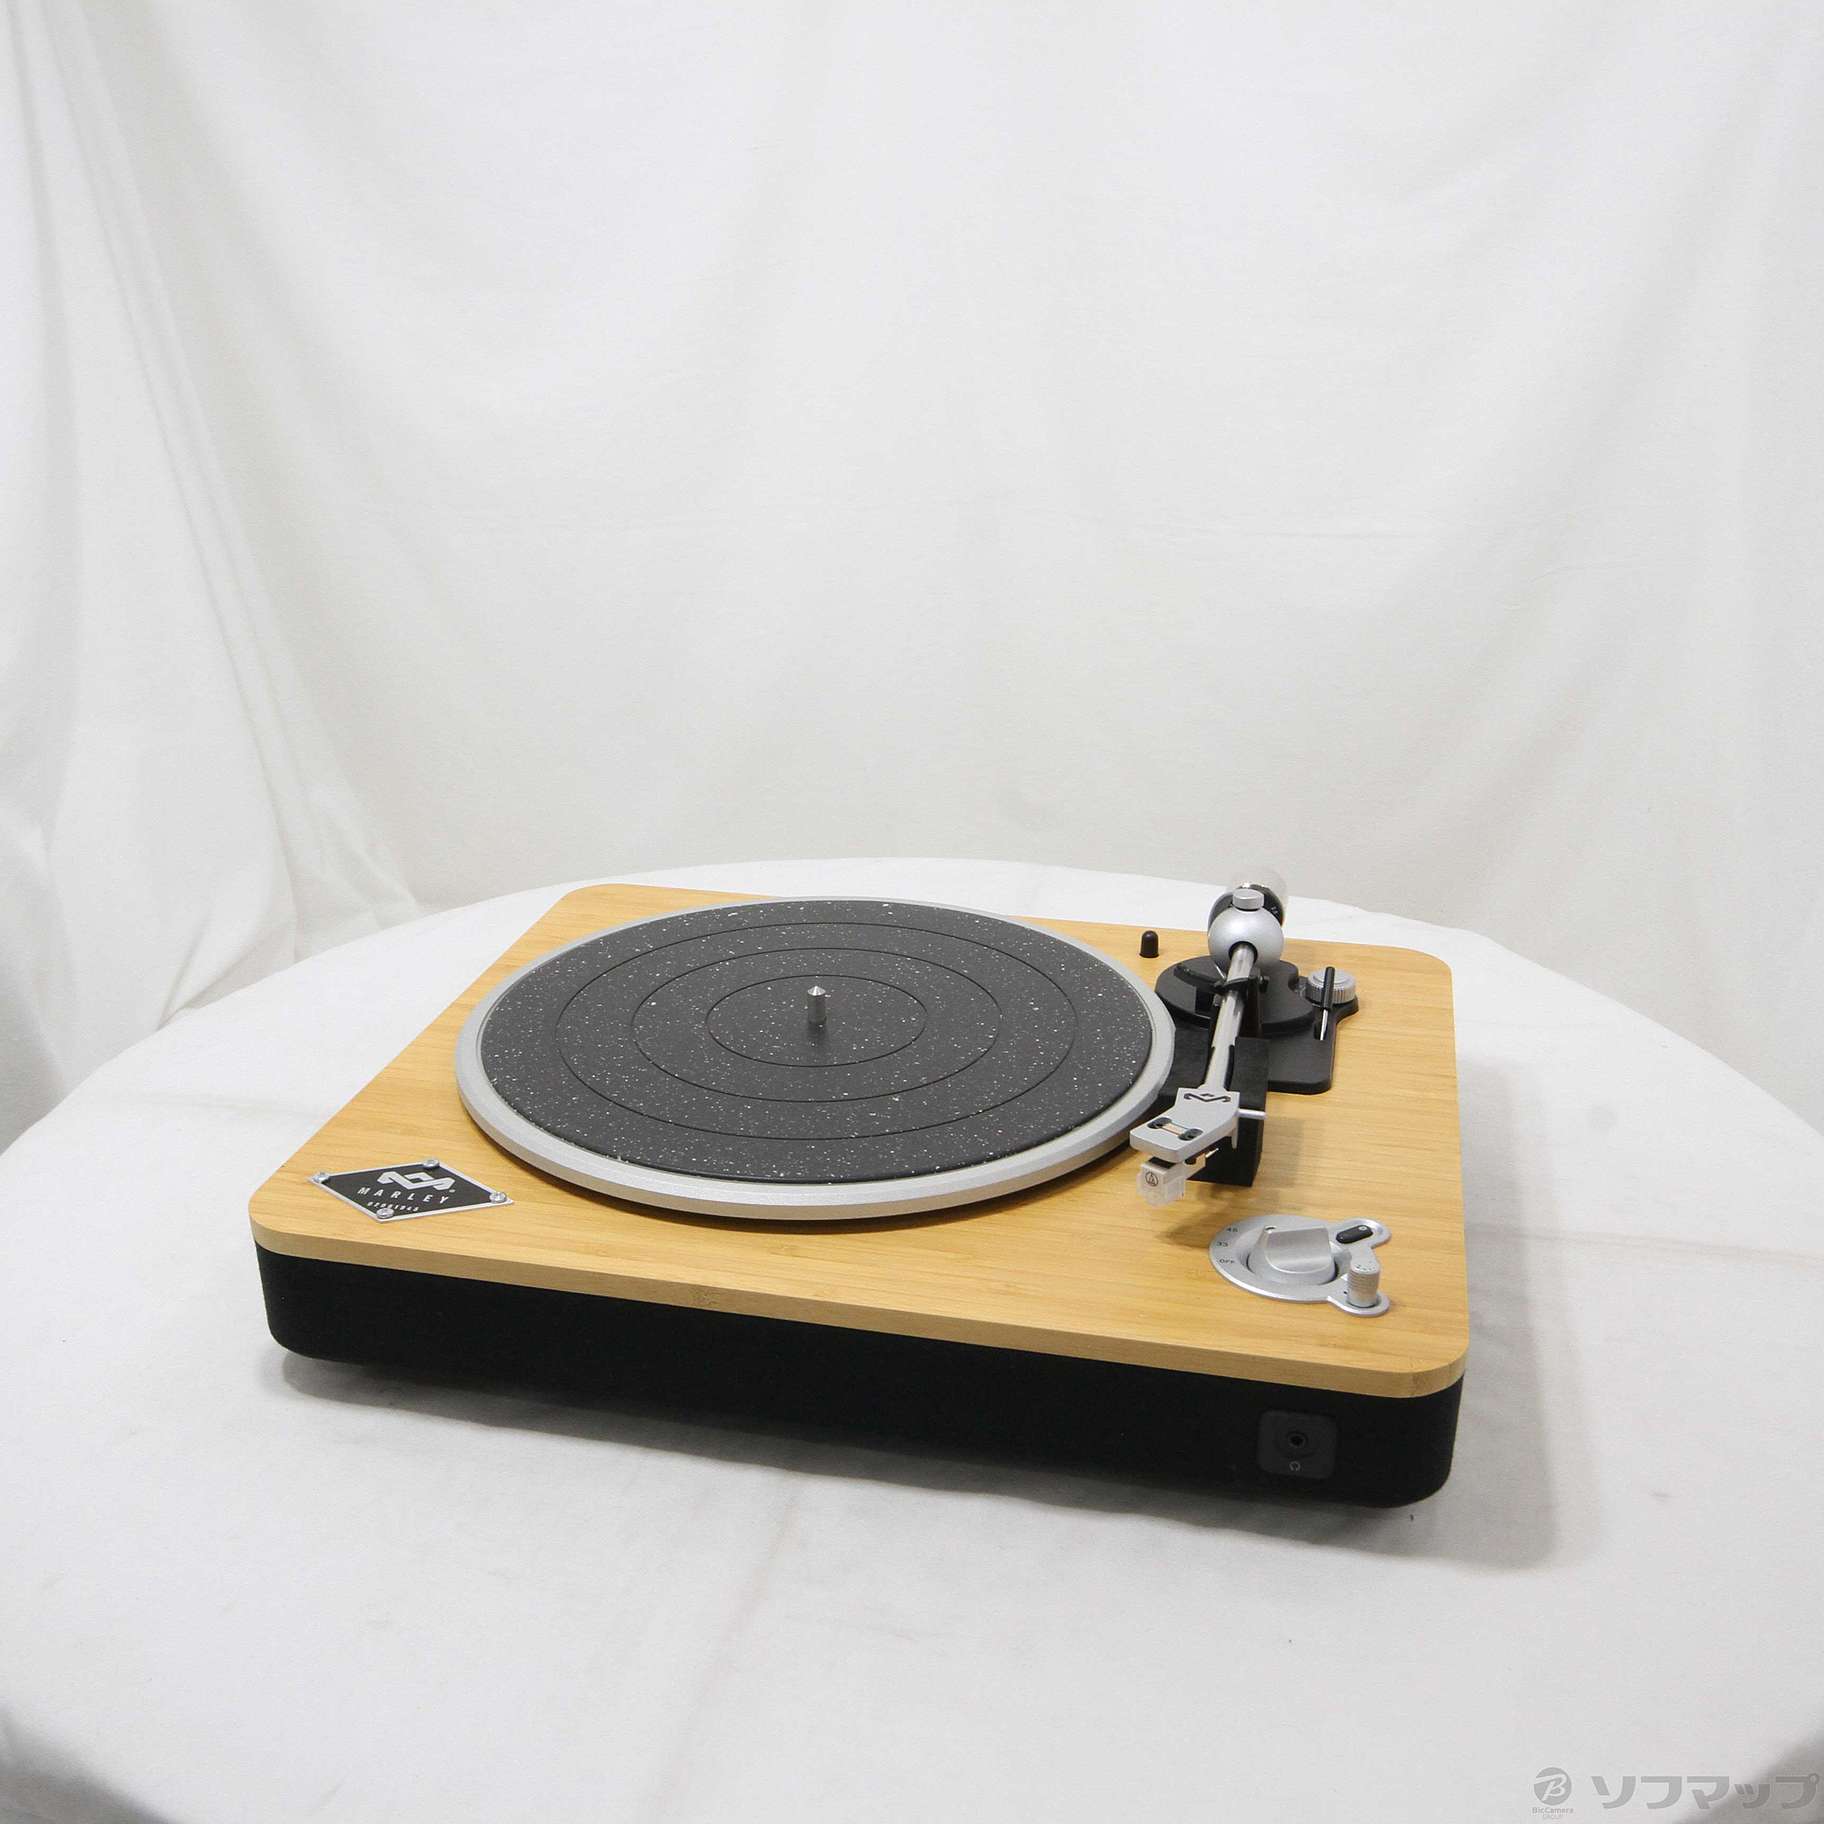 House of Marley Stir It Up Wireless Turntable review: Eco-conscious grooves